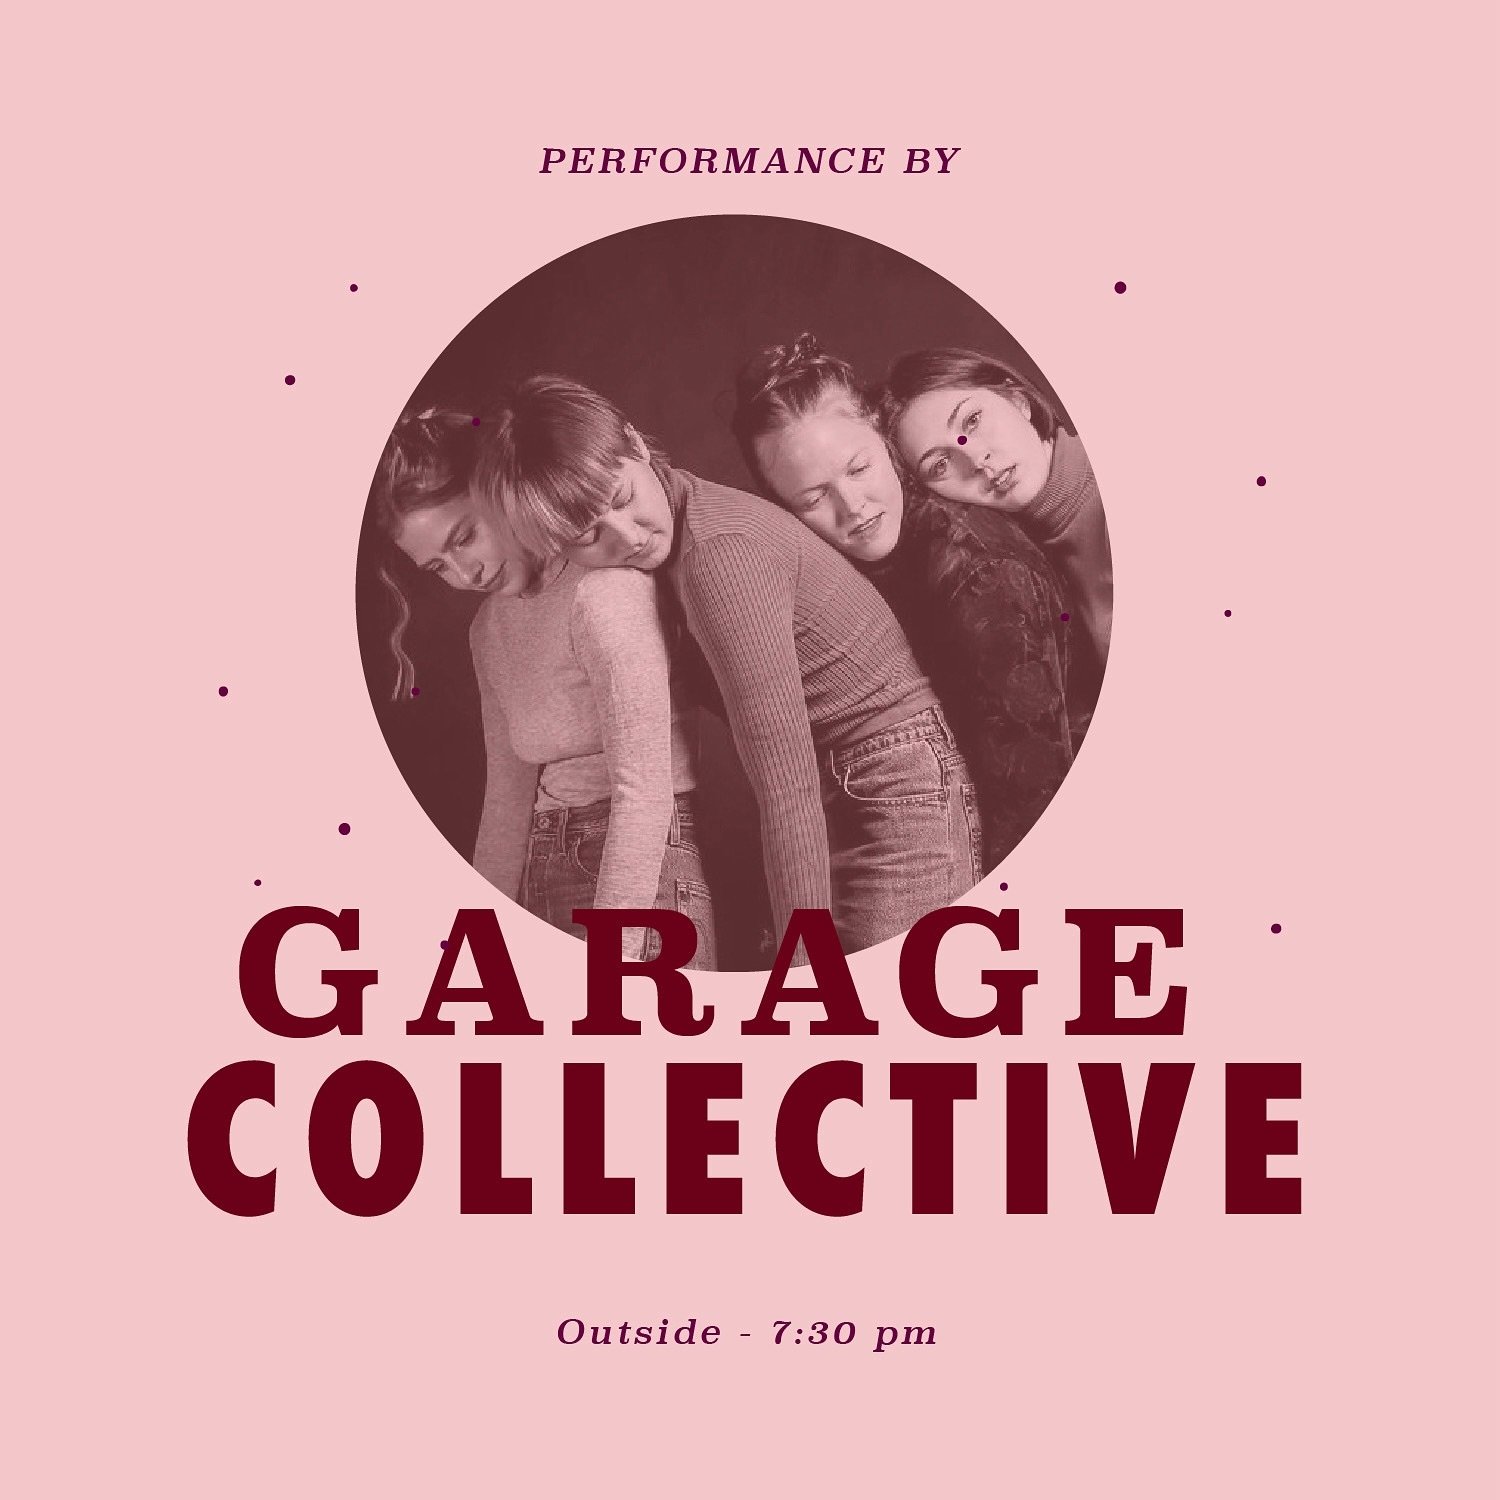 COOP Gallery&rsquo;s Garden of Earthly Delights is pleased to welcome @g.a.r.a.g.e.c.o performing live at 7:30 PM on the Lawn. Come join artists supporting artists and get your tickets today, link in bio! May 3rd, don&rsquo;t miss it!